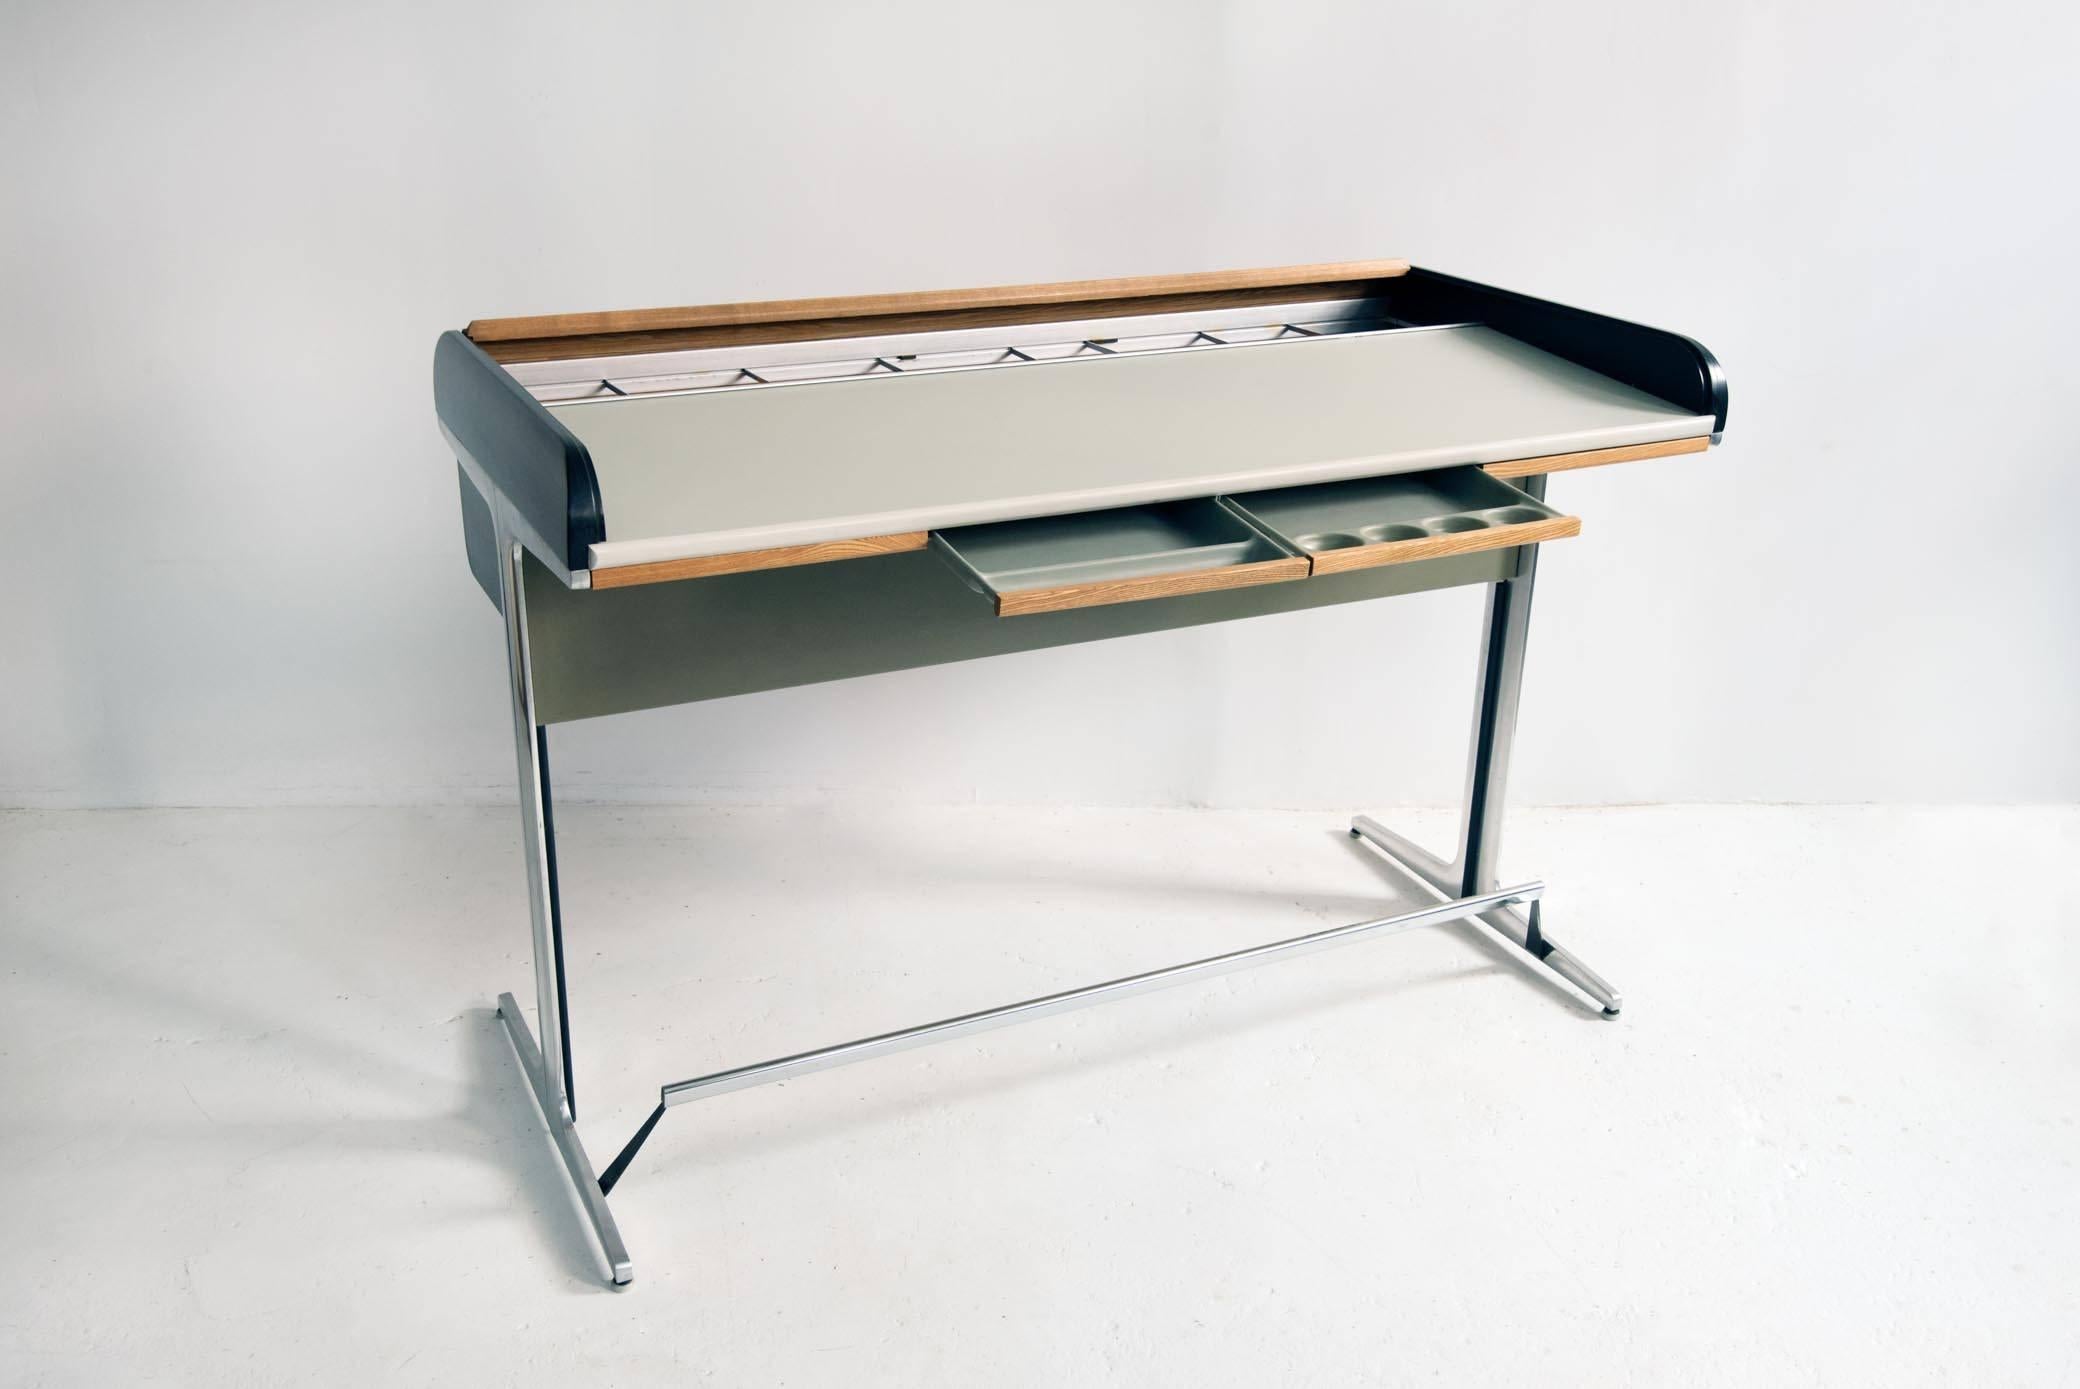 A high, roll-top desk from the Action Office or No. 649 Series designed by George Nelson & Robert Propst for Herman Miller, circa 1964-1968. Featuring an ash tambour top that opens up to reveal a large laminate working surface with designated